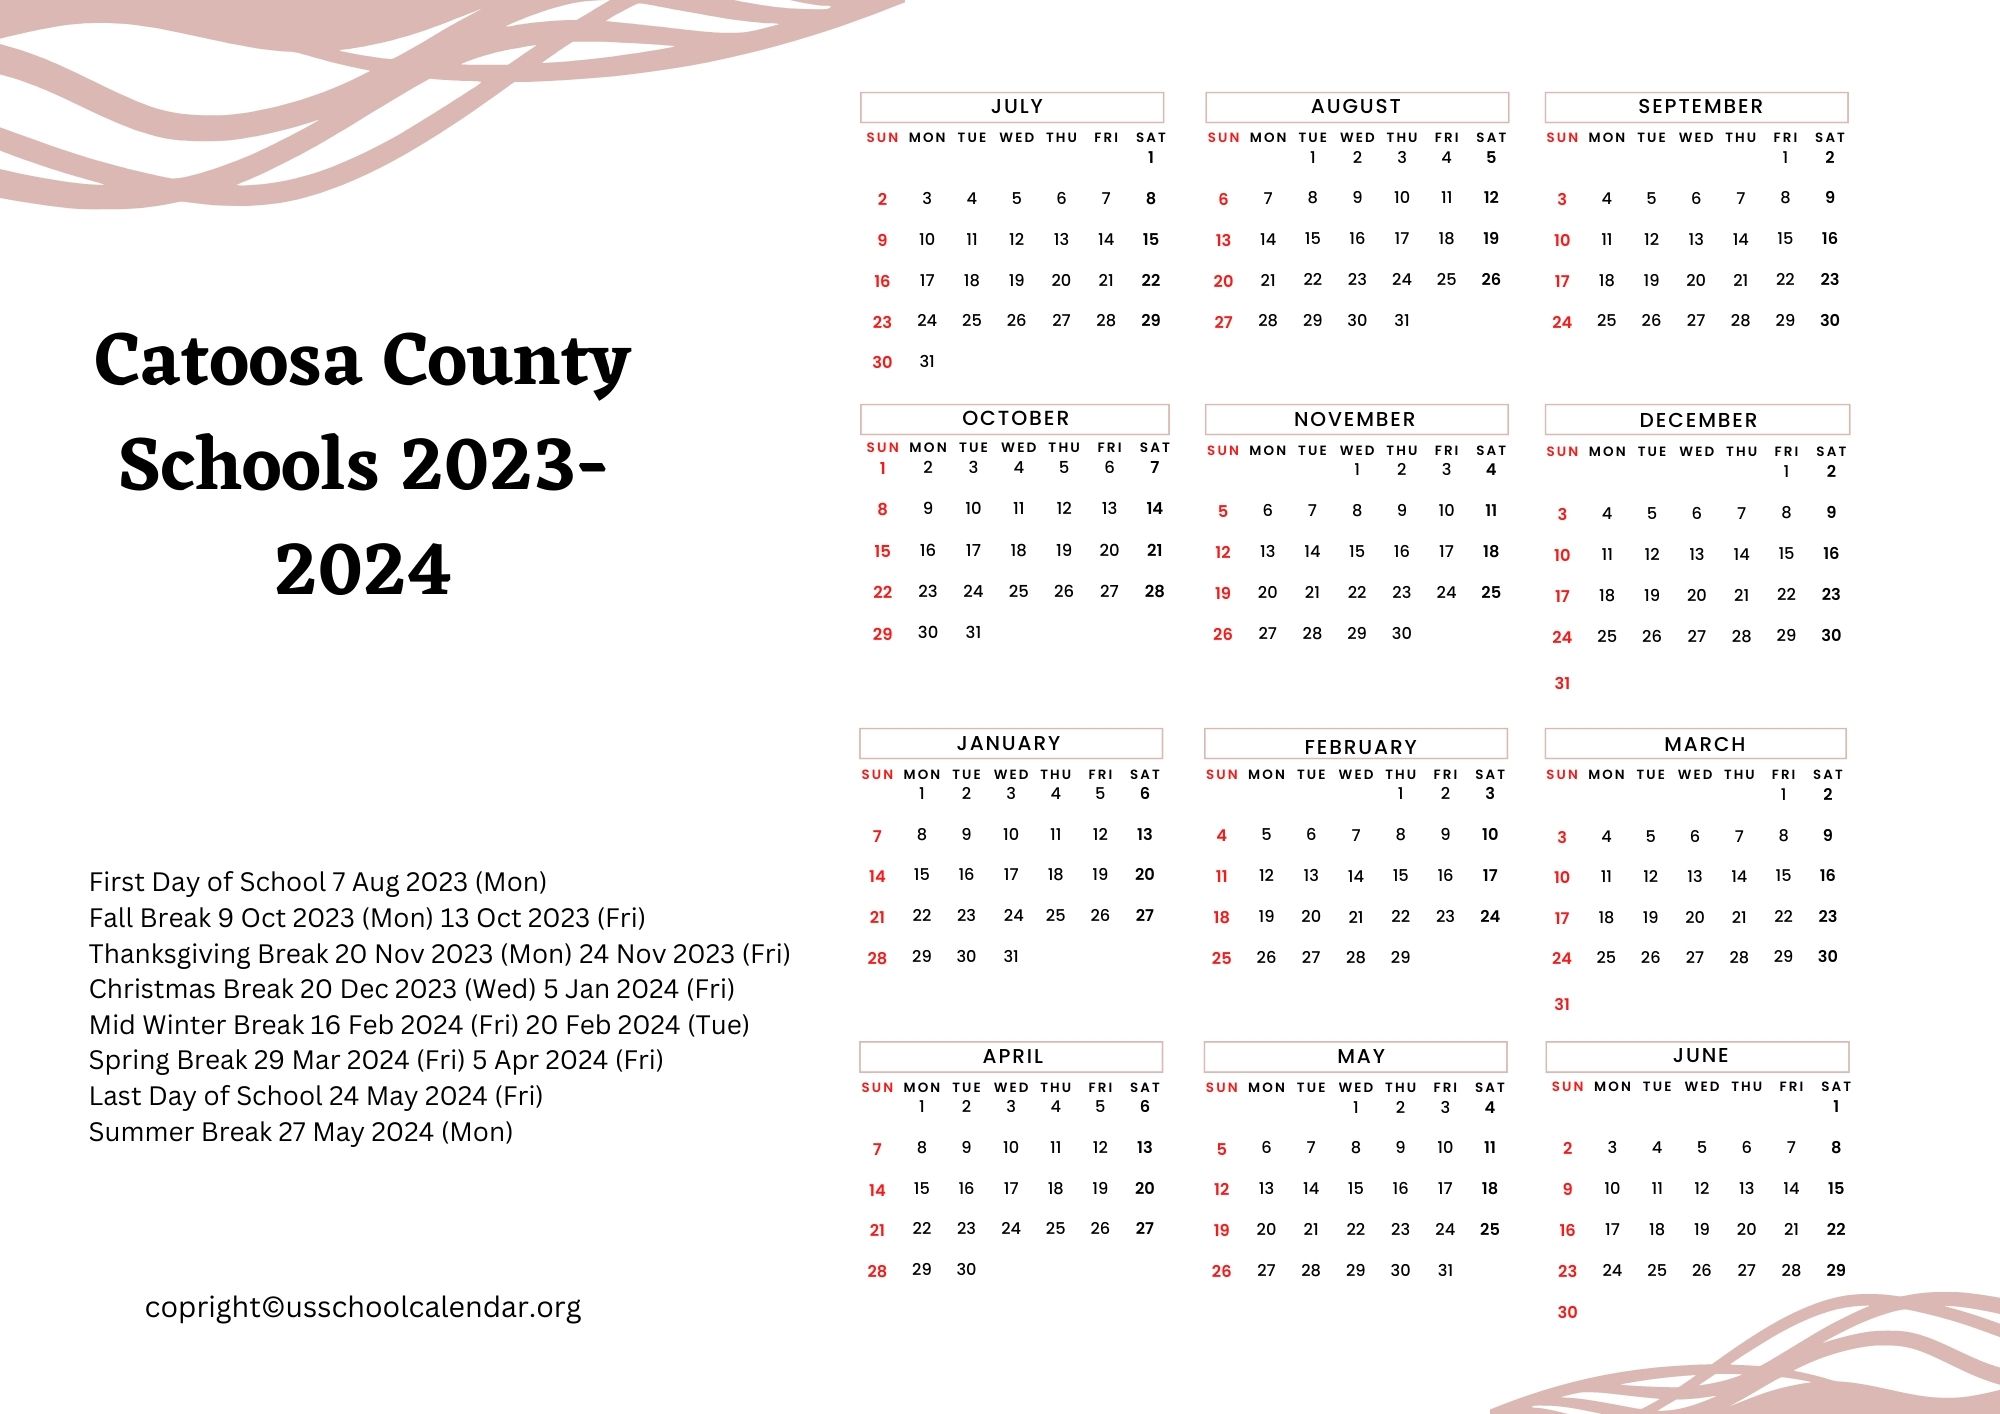 Catoosa County Schools Calendar with Holidays 20232024